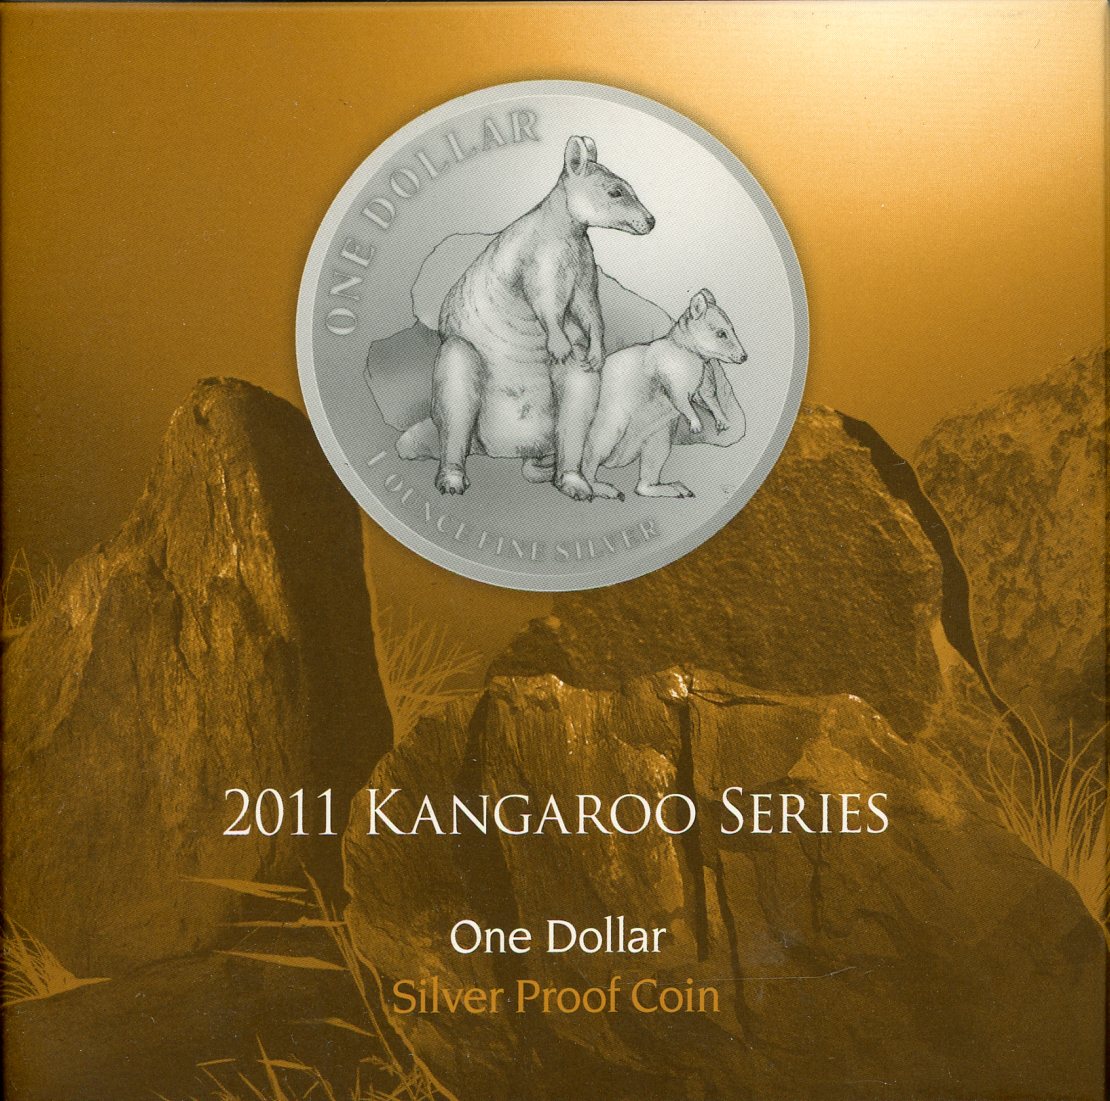 Thumbnail for 2011 $1 Silver Proof Coin Kangaroo Series - Allied Rock Wallaby